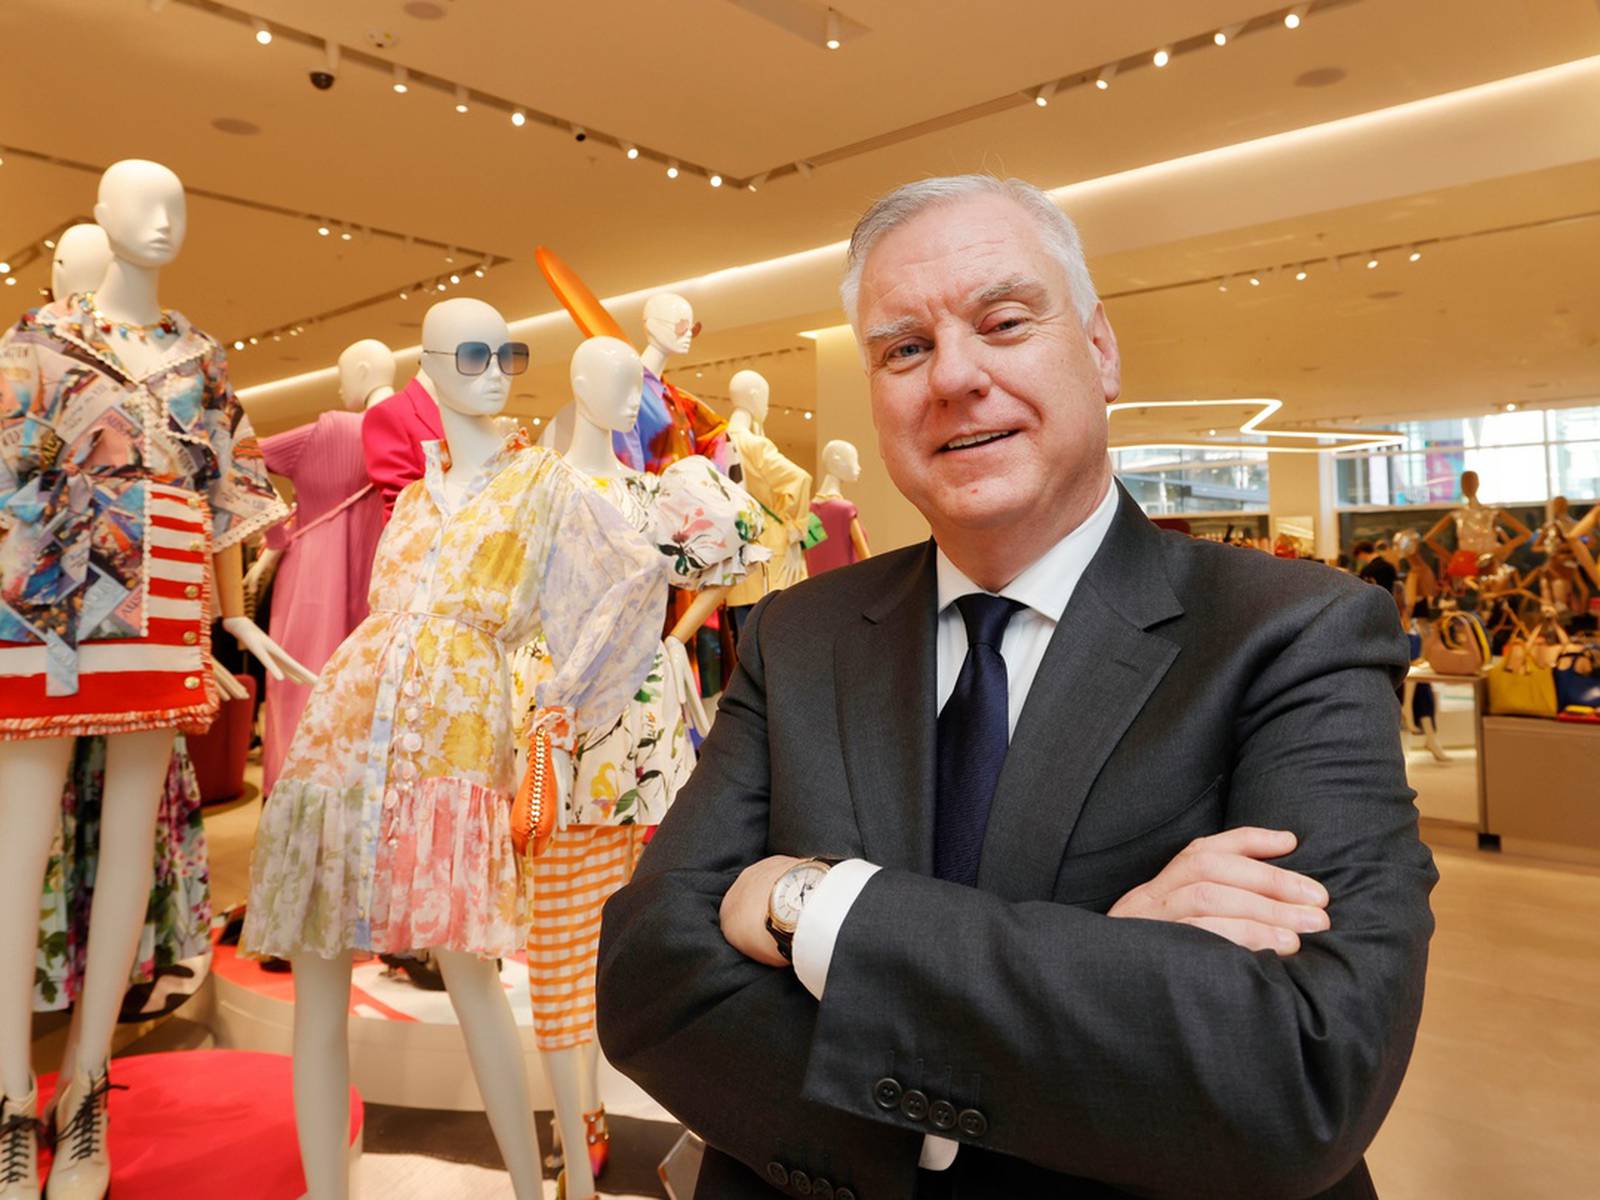 Inside new Brown Thomas store in Dundrum - as they launch dress